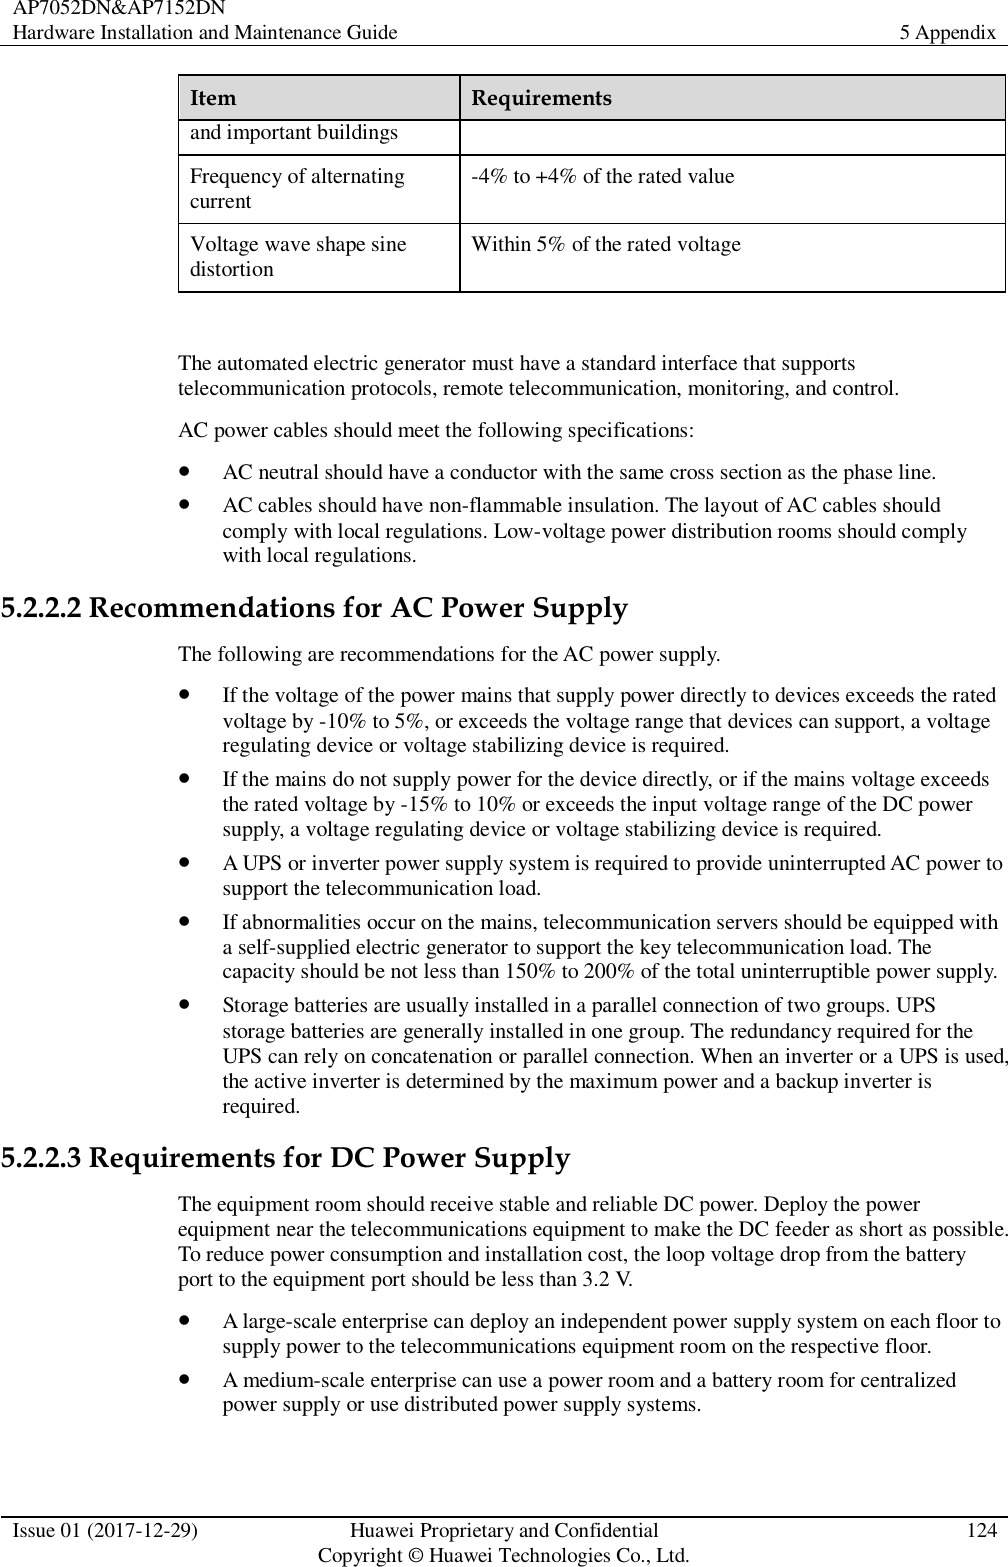 AP7052DN&amp;AP7152DN Hardware Installation and Maintenance Guide 5 Appendix  Issue 01 (2017-12-29) Huawei Proprietary and Confidential                                     Copyright © Huawei Technologies Co., Ltd. 124  Item Requirements and important buildings Frequency of alternating current -4% to +4% of the rated value Voltage wave shape sine distortion Within 5% of the rated voltage  The automated electric generator must have a standard interface that supports telecommunication protocols, remote telecommunication, monitoring, and control. AC power cables should meet the following specifications:  AC neutral should have a conductor with the same cross section as the phase line.  AC cables should have non-flammable insulation. The layout of AC cables should comply with local regulations. Low-voltage power distribution rooms should comply with local regulations. 5.2.2.2 Recommendations for AC Power Supply The following are recommendations for the AC power supply.  If the voltage of the power mains that supply power directly to devices exceeds the rated voltage by -10% to 5%, or exceeds the voltage range that devices can support, a voltage regulating device or voltage stabilizing device is required.  If the mains do not supply power for the device directly, or if the mains voltage exceeds the rated voltage by -15% to 10% or exceeds the input voltage range of the DC power supply, a voltage regulating device or voltage stabilizing device is required.  A UPS or inverter power supply system is required to provide uninterrupted AC power to support the telecommunication load.  If abnormalities occur on the mains, telecommunication servers should be equipped with a self-supplied electric generator to support the key telecommunication load. The capacity should be not less than 150% to 200% of the total uninterruptible power supply.  Storage batteries are usually installed in a parallel connection of two groups. UPS storage batteries are generally installed in one group. The redundancy required for the UPS can rely on concatenation or parallel connection. When an inverter or a UPS is used, the active inverter is determined by the maximum power and a backup inverter is required. 5.2.2.3 Requirements for DC Power Supply The equipment room should receive stable and reliable DC power. Deploy the power equipment near the telecommunications equipment to make the DC feeder as short as possible. To reduce power consumption and installation cost, the loop voltage drop from the battery port to the equipment port should be less than 3.2 V.  A large-scale enterprise can deploy an independent power supply system on each floor to supply power to the telecommunications equipment room on the respective floor.  A medium-scale enterprise can use a power room and a battery room for centralized power supply or use distributed power supply systems. 